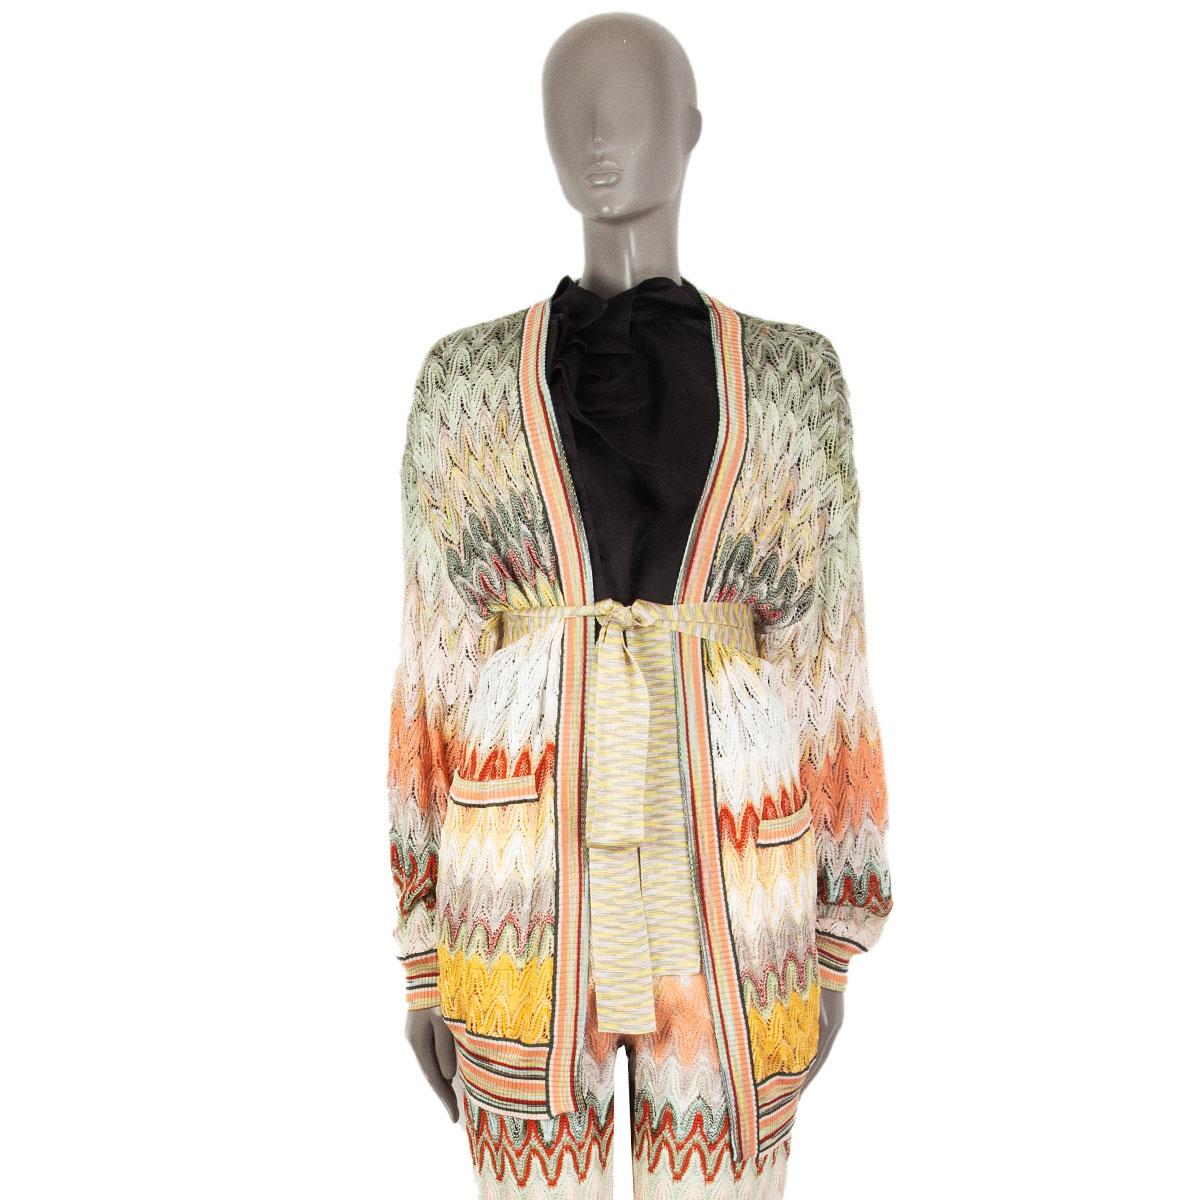 100% authentic Missoni zigzag collarless knit wrap cardigan in multicolour viscose (100% - please not the content tag is missing). Features patch pockets, at front, self-tie belt at waist, scallop fine knit and ribbed trims. Has been worn and is in